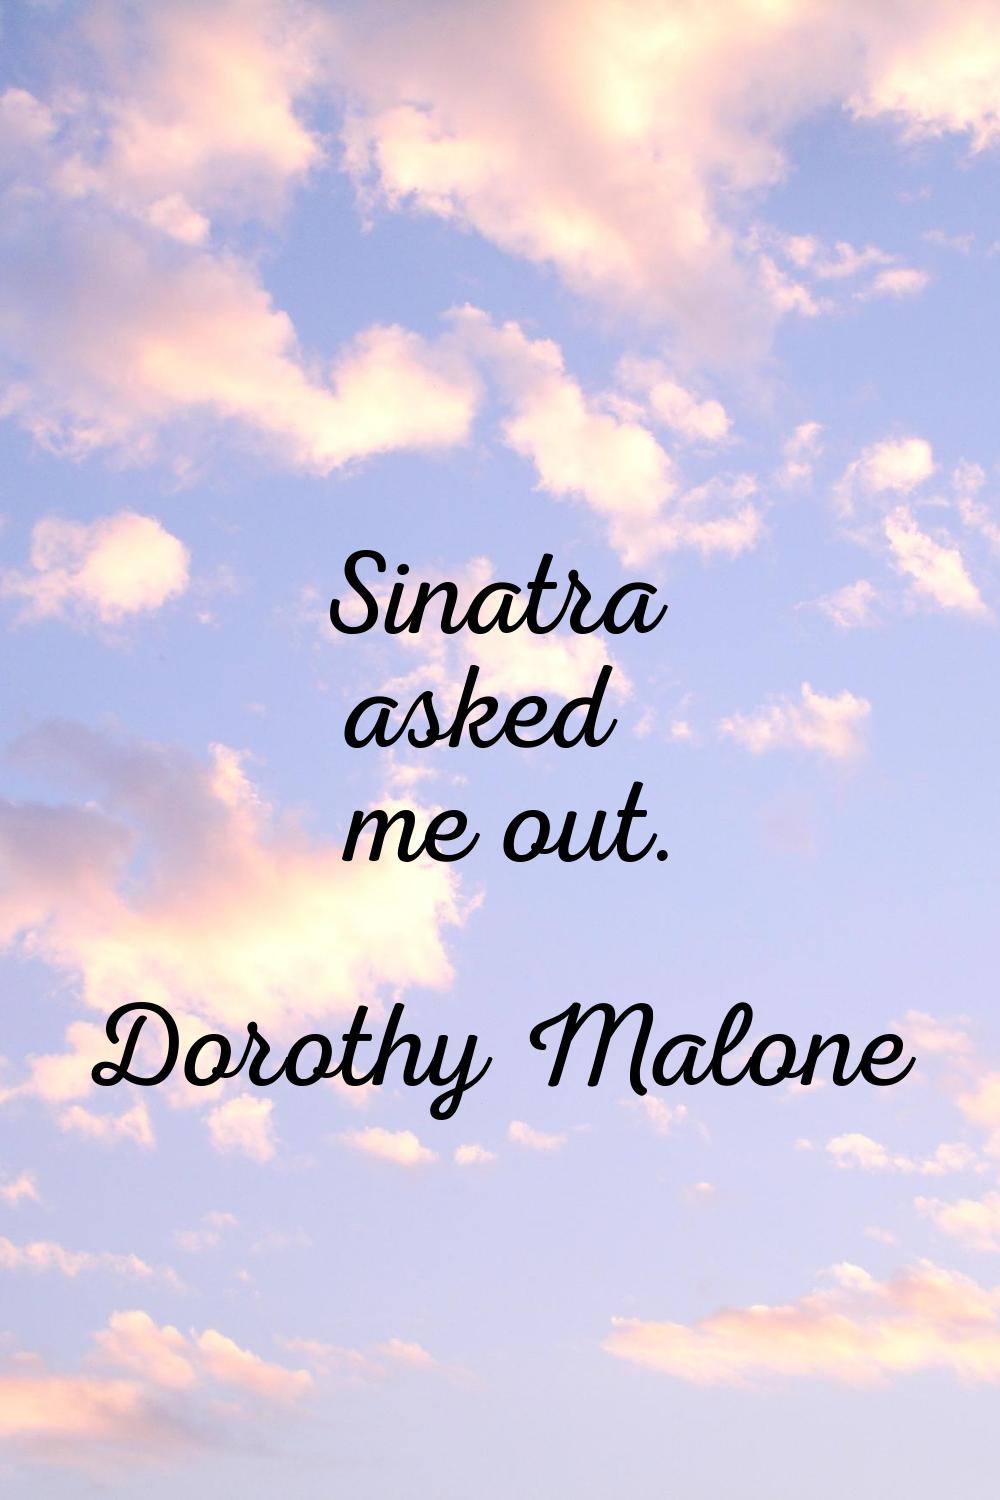 Sinatra asked me out.